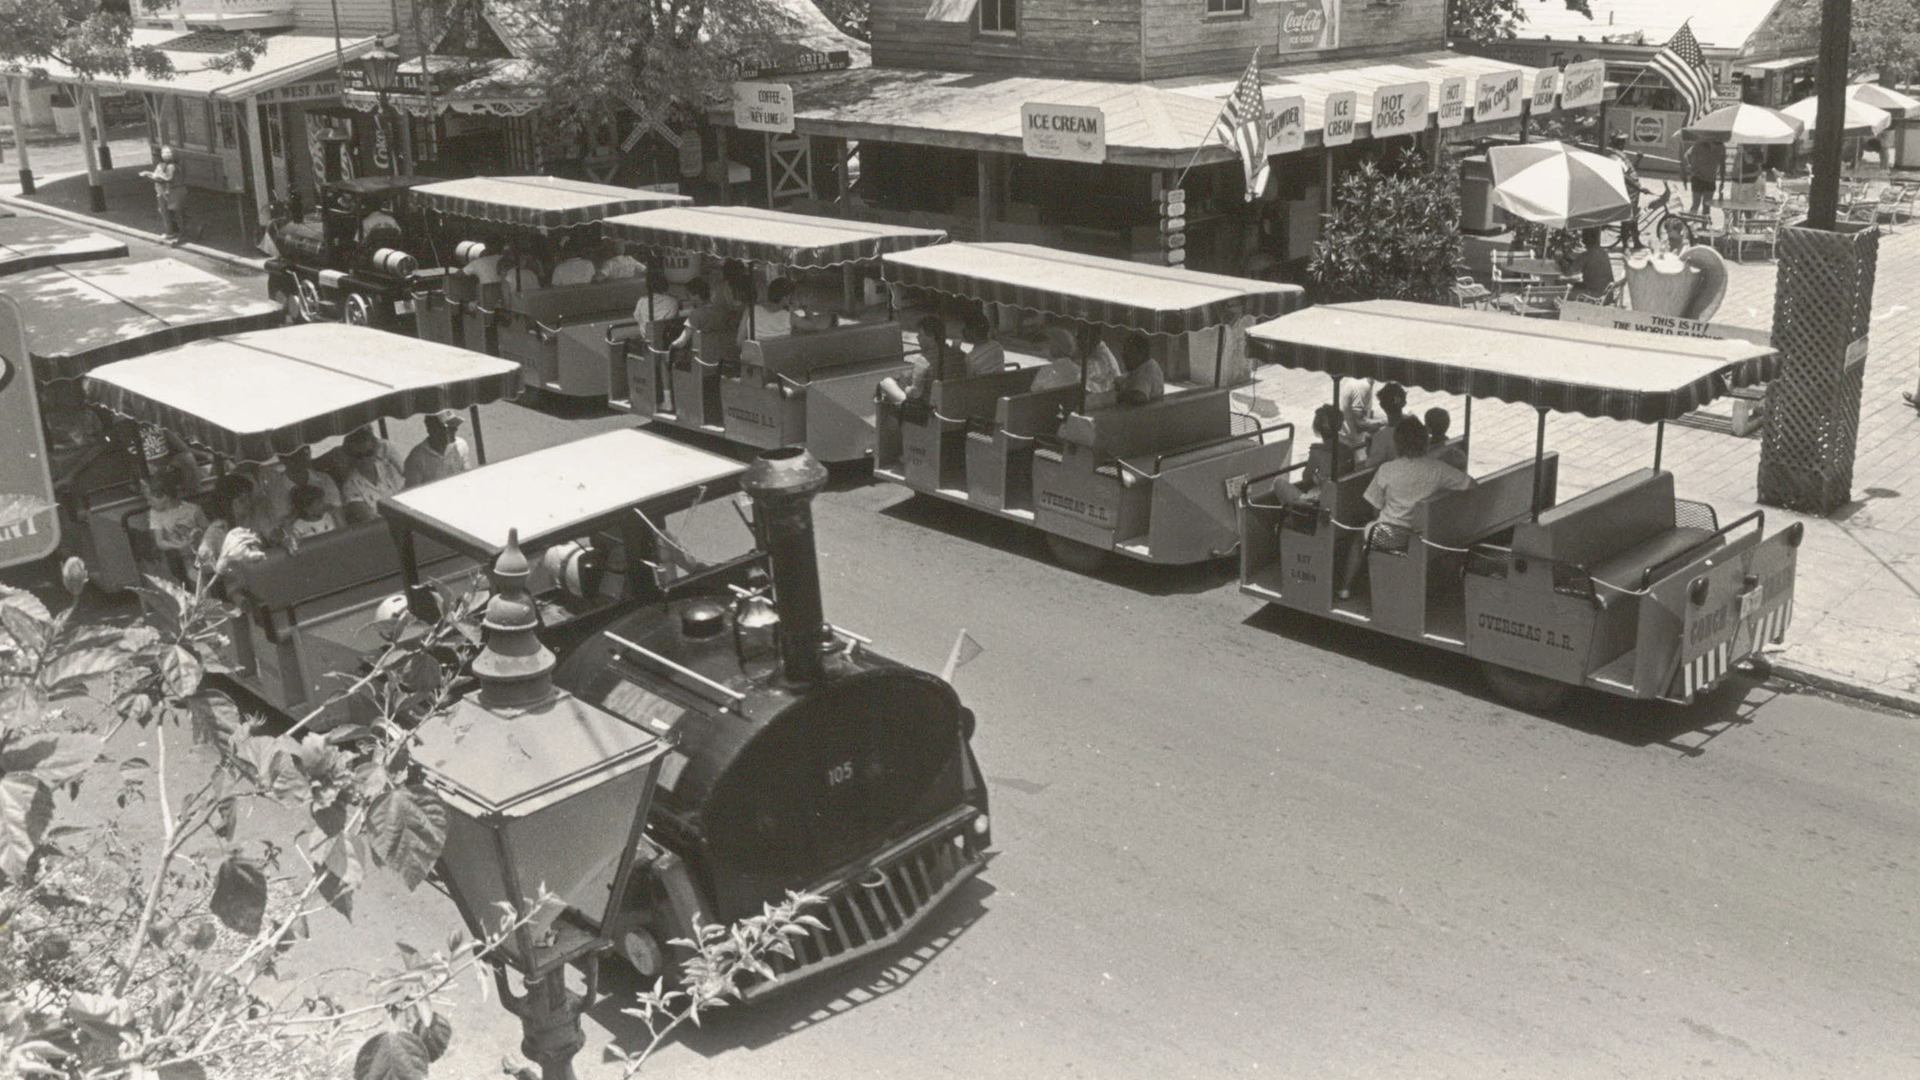 conch tour train in the 50's driving through key west